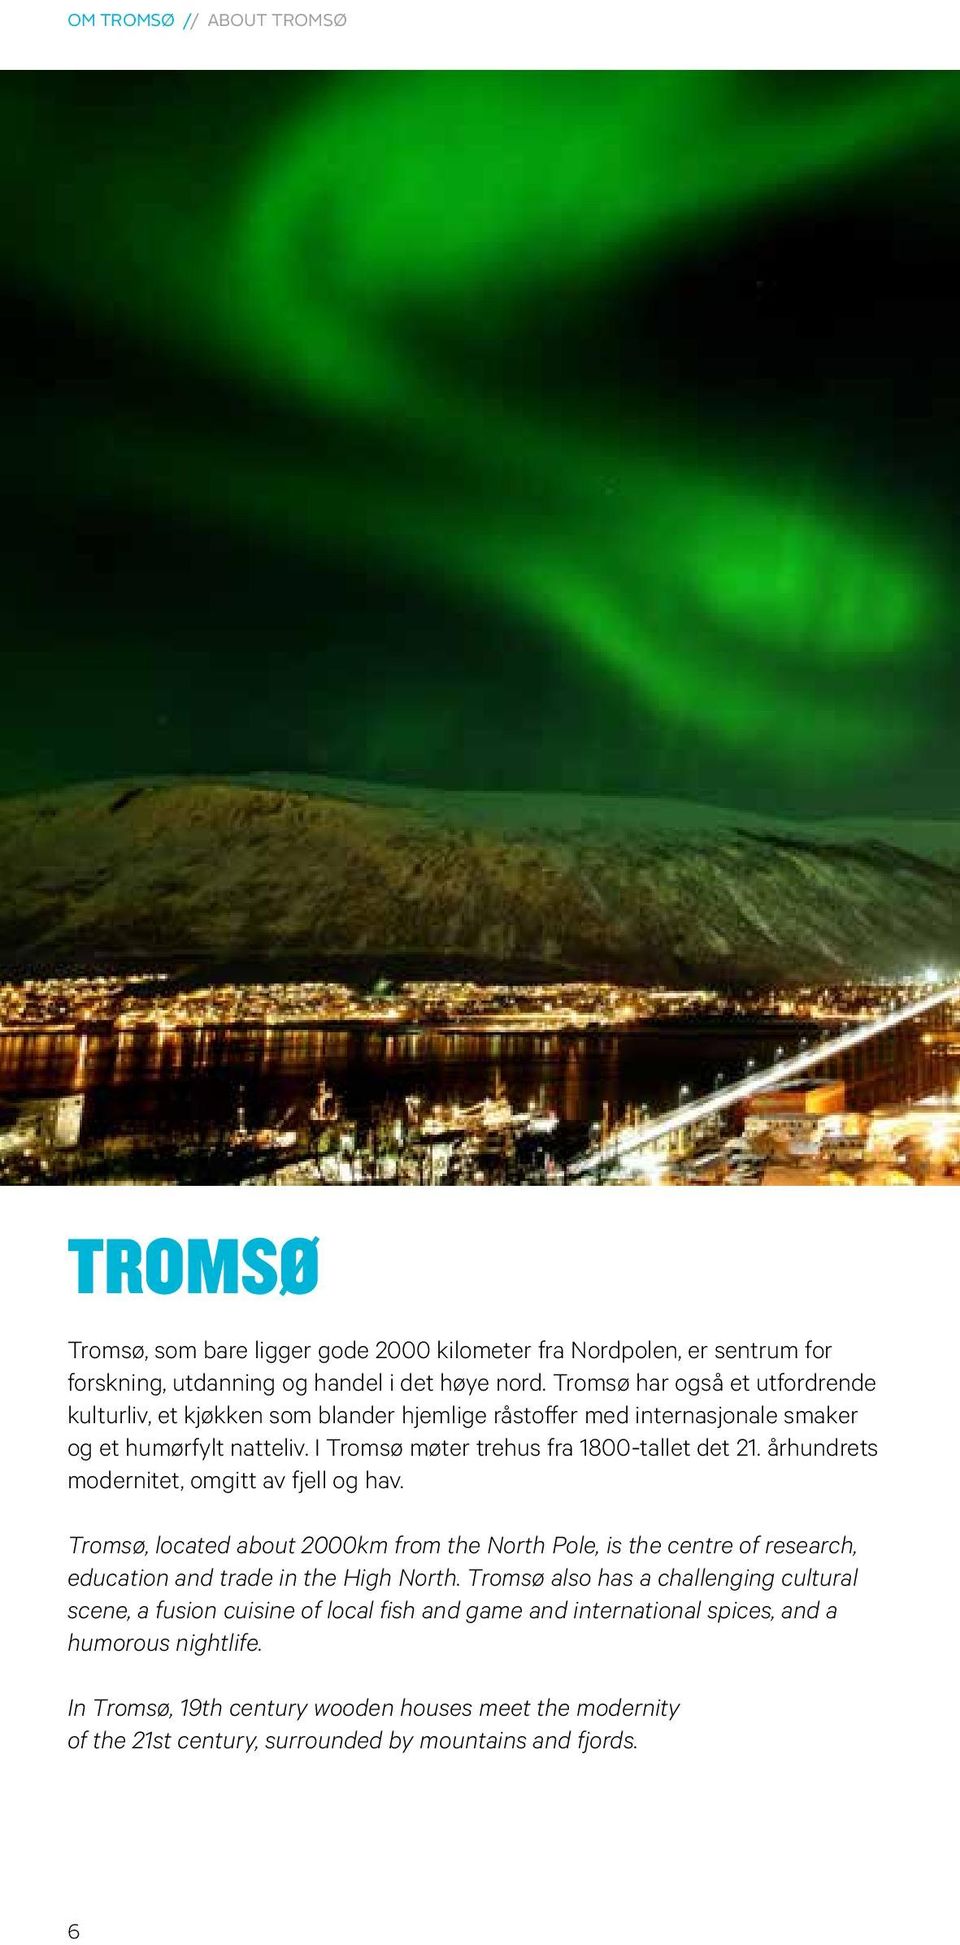 århundrets modernitet, omgitt av fjell og hav. Tromsø, located about 2000km from the North Pole, is the centre of research, education and trade in the High North.